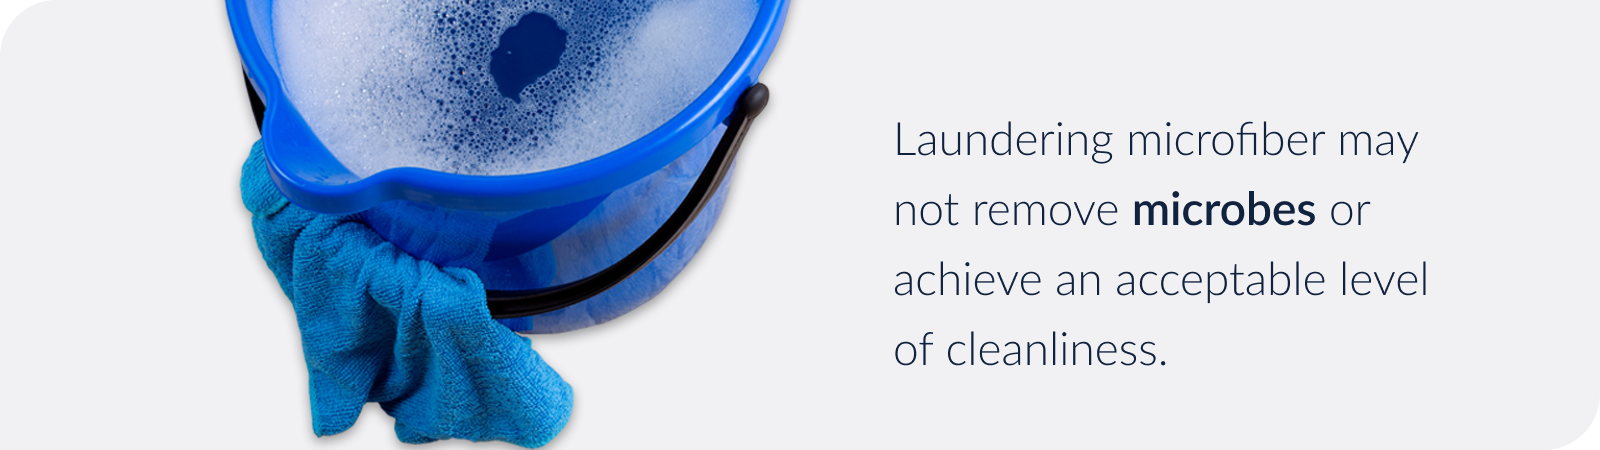 Laundering microfiber may not remove microbes or achieve an acceptable level of cleanliness.